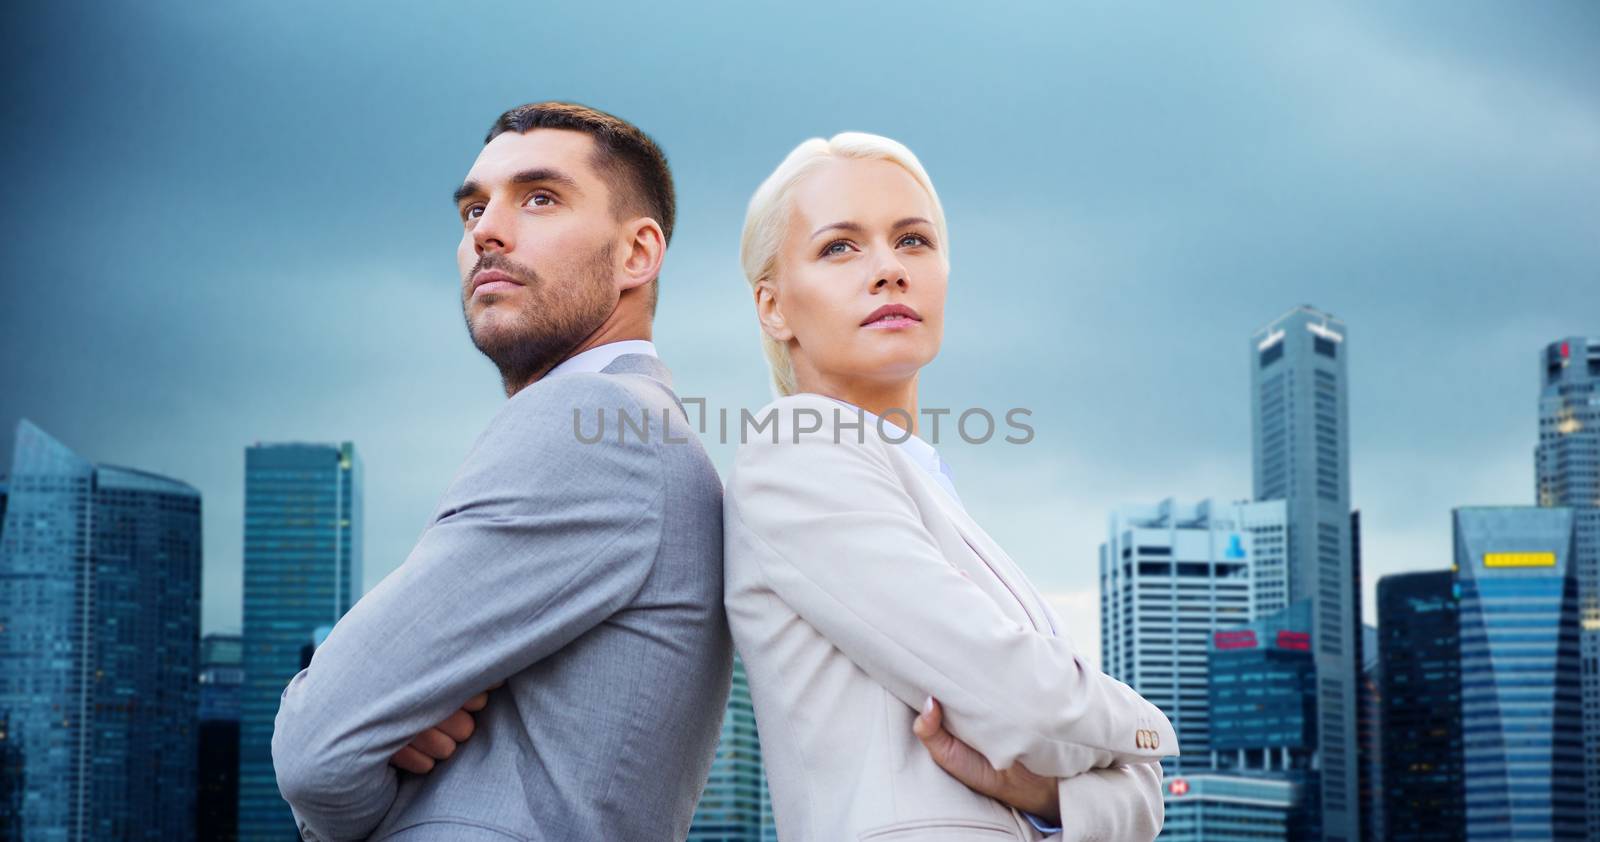 business, partnership, teamwork and people concept - businessman and businesswoman standing over city buildings background